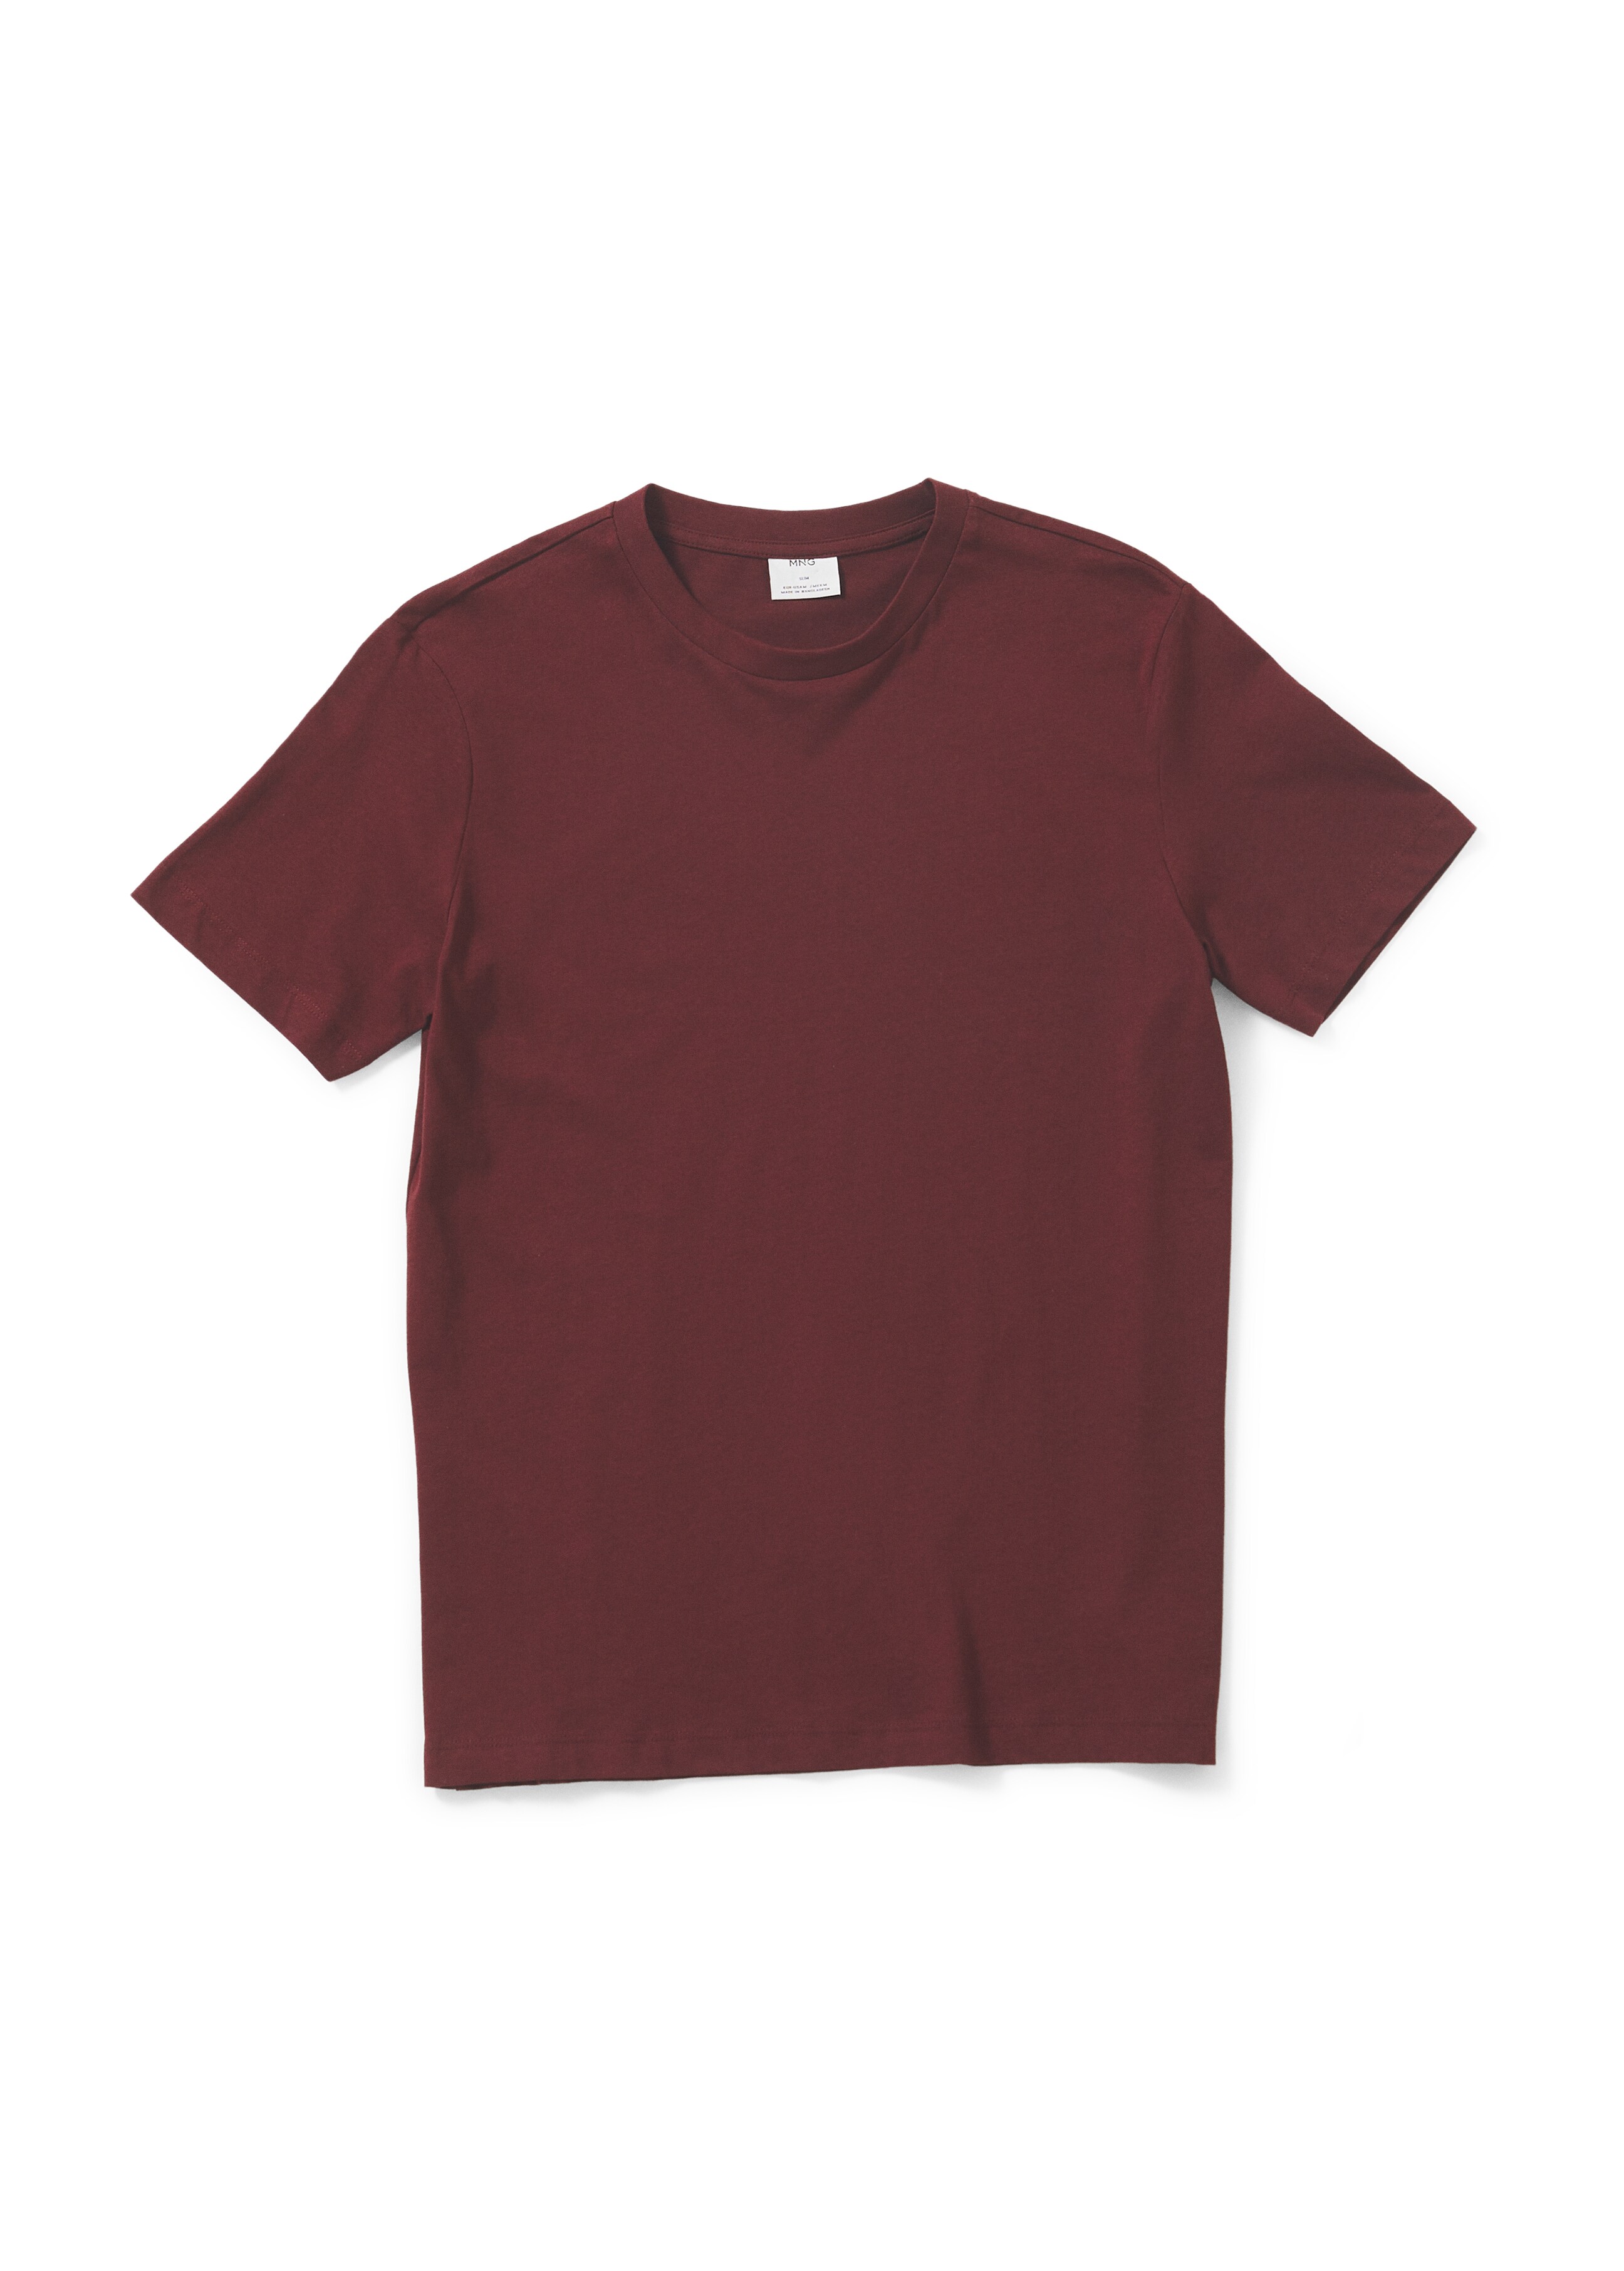 Basic lightweight cotton t-shirt - Details of the article 9